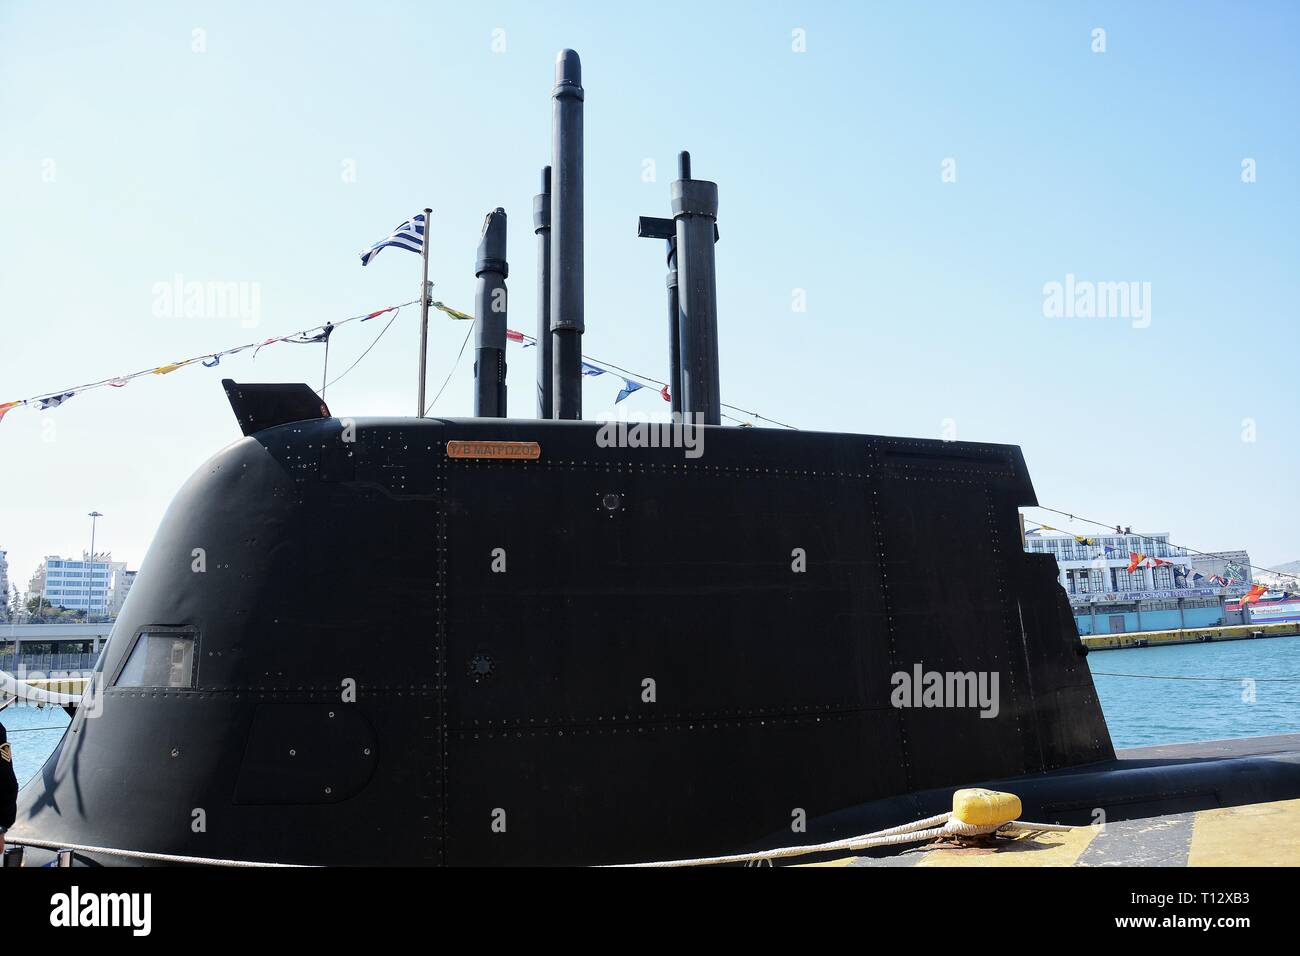 Submarine Matrozos seen at Piraeus Port. Due to the Greek Independence Day Piraeus Port is open to the public, a national holiday celebrated annually in Greece on March 25, commemorating the start of the War of Greek’s Independence in 1821. Stock Photo